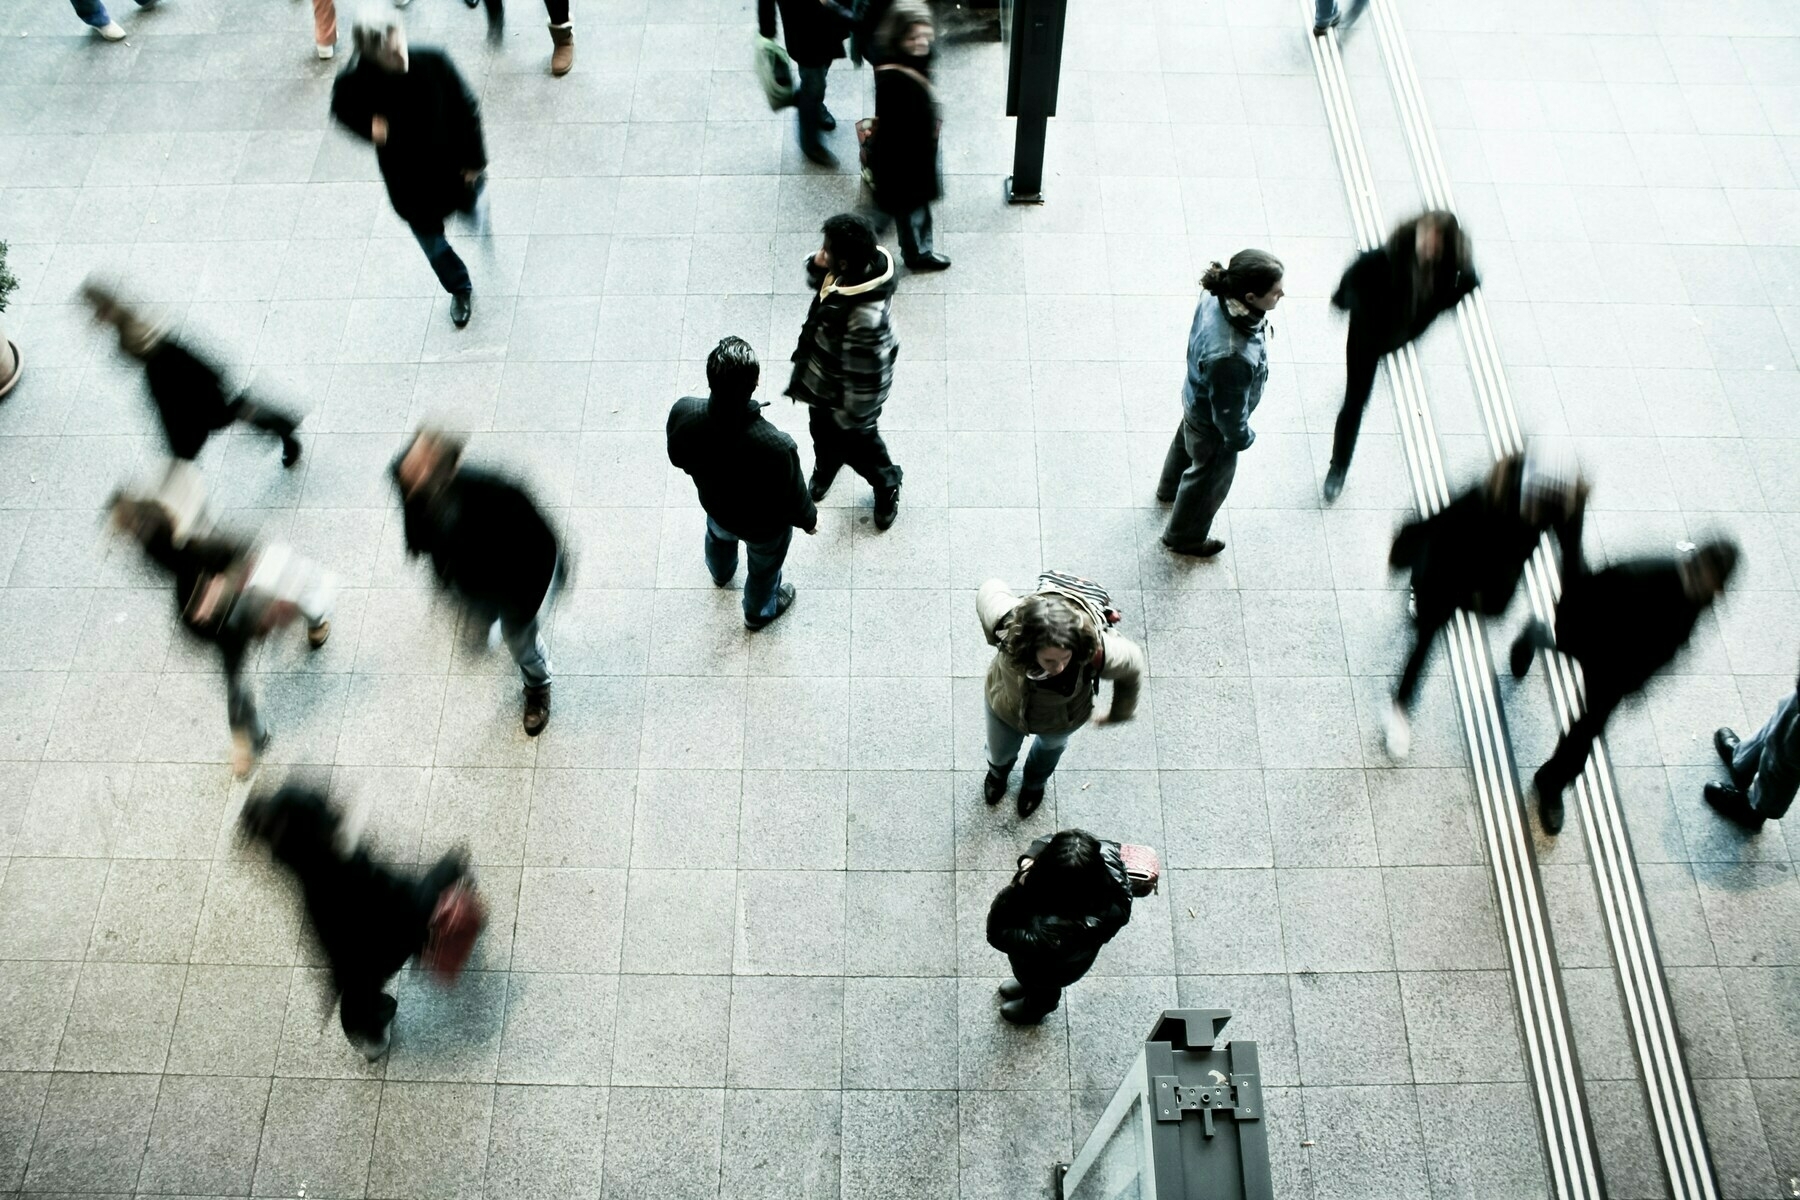 Overhead view of a busy indoor area with blurred figures walking, capturing the motion and activity of a crowded public space.